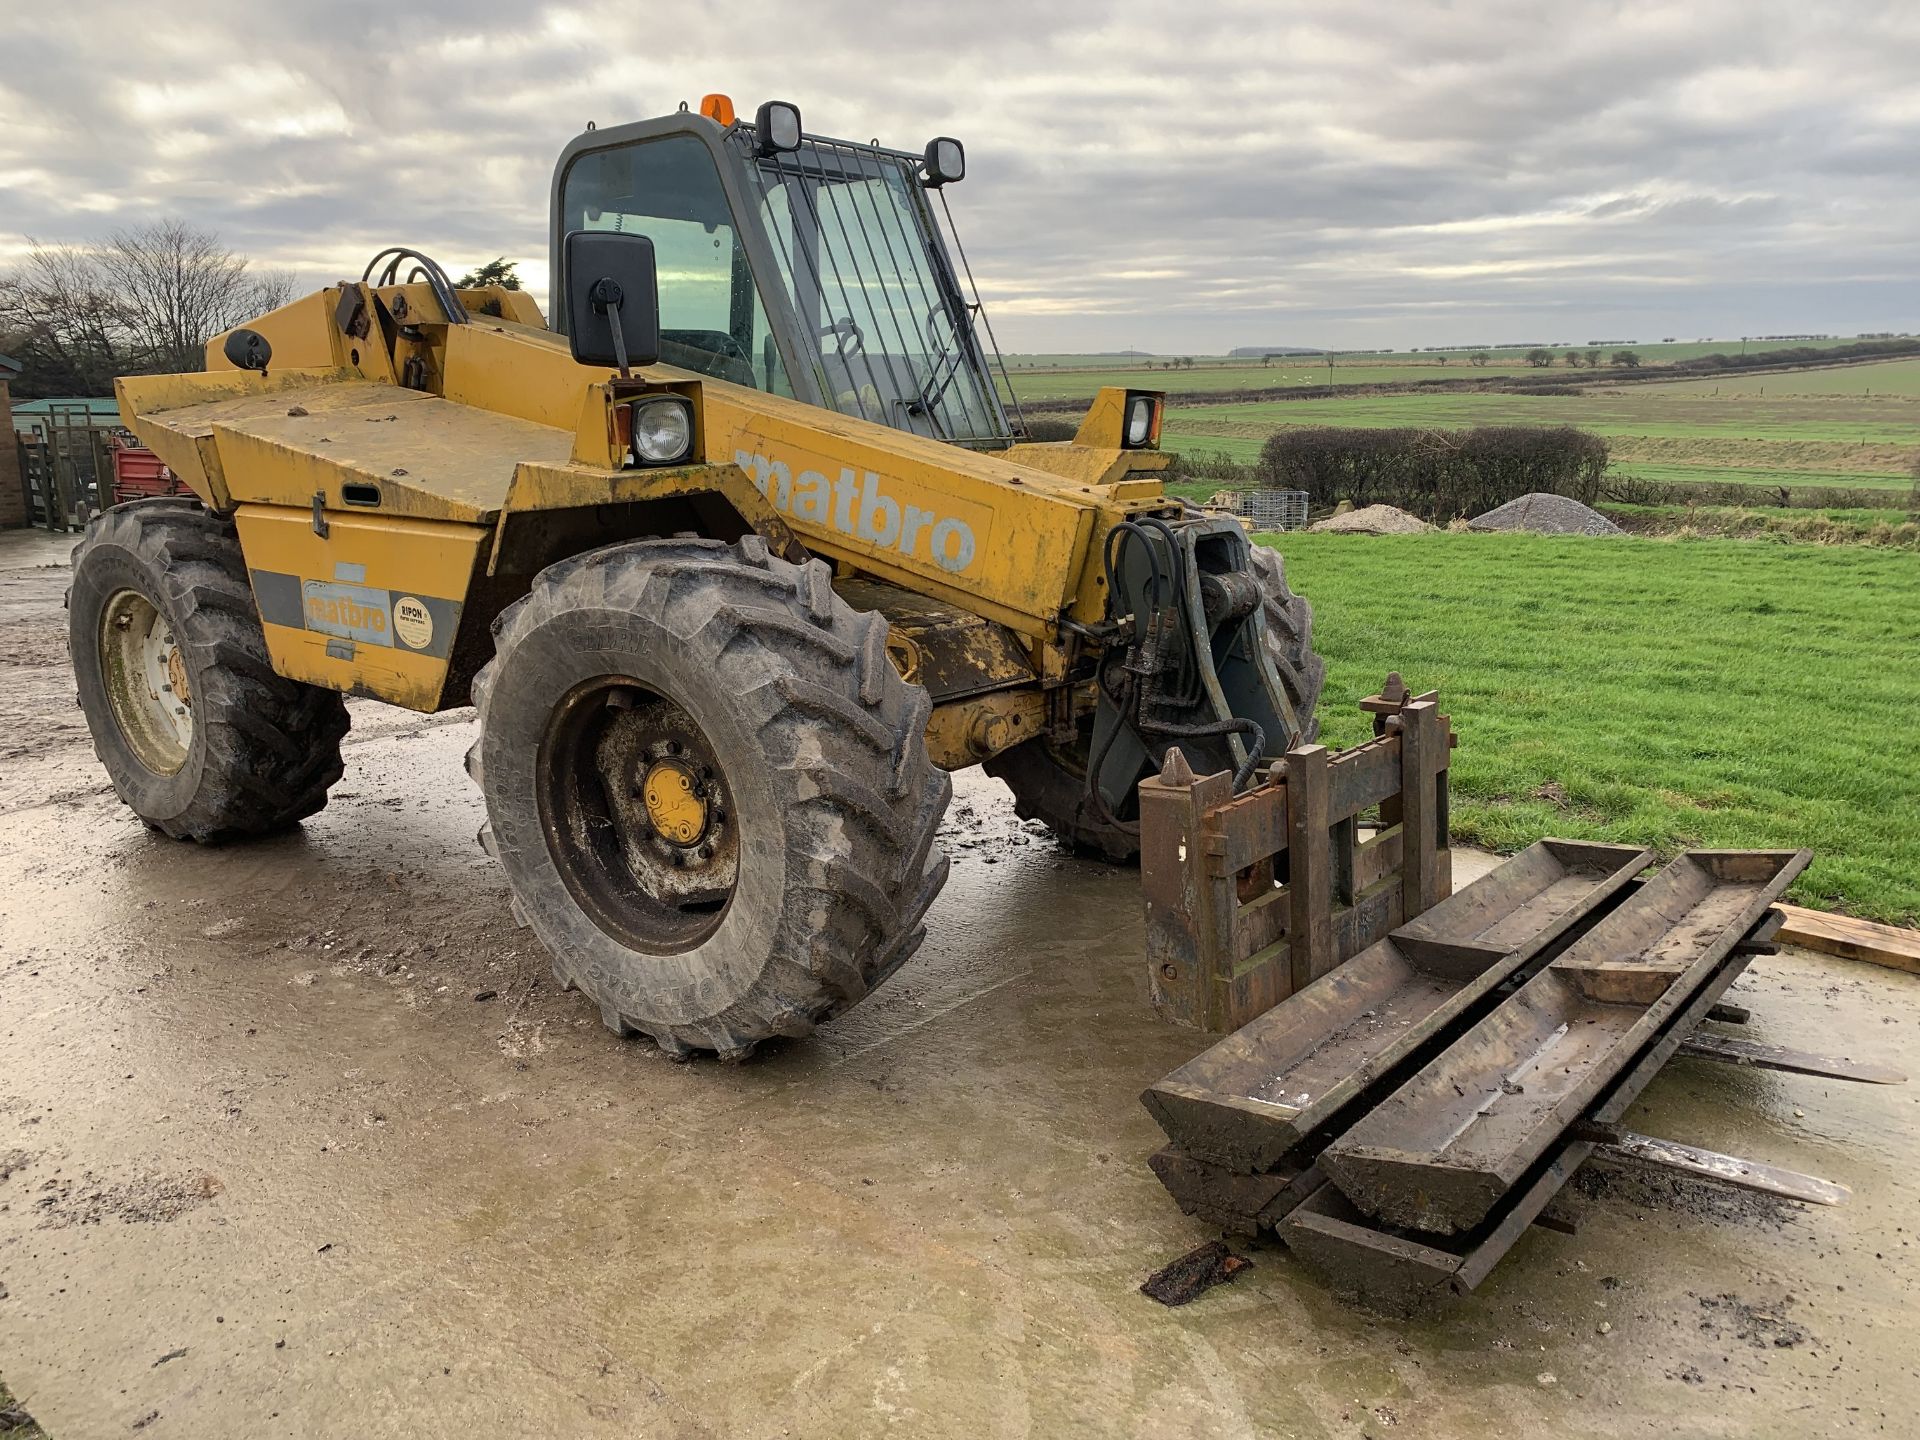 NO VAT 1993 Matbro TS260 telehandler, L938 WKH, 4900 hours, 460/70R24 (80%) tyres, with pallet tines - Image 8 of 8